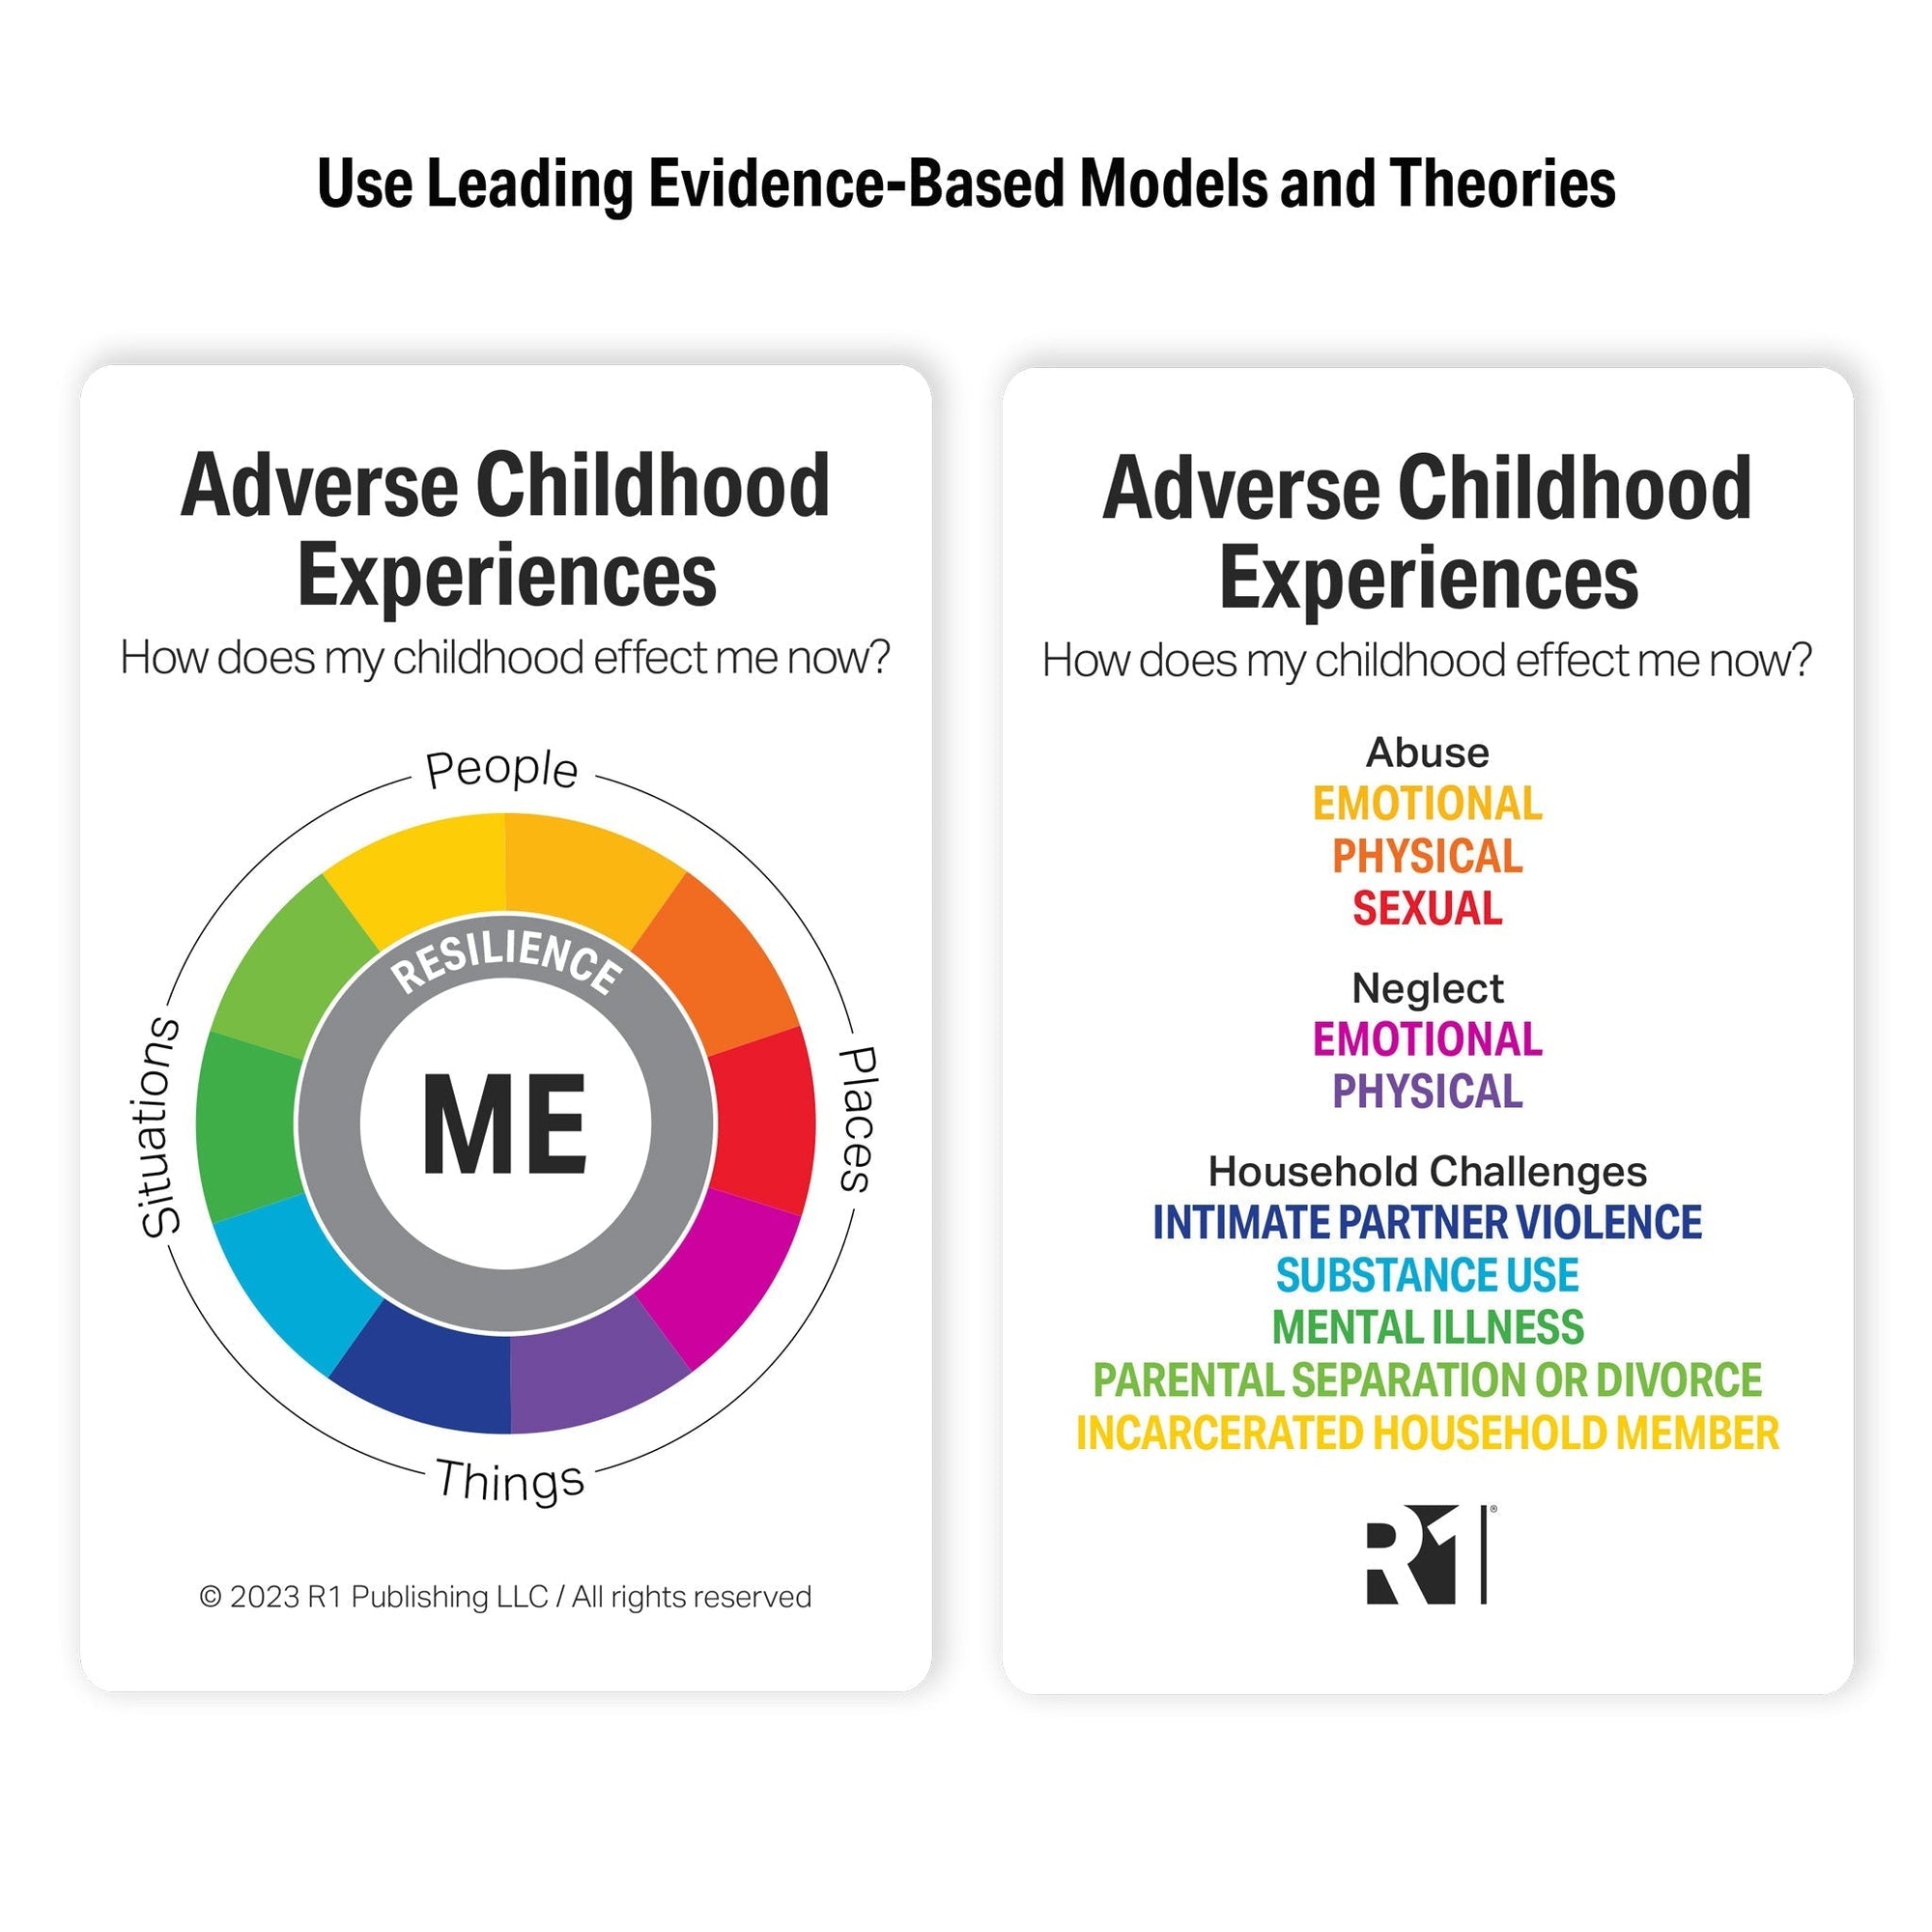 Adverse Childhood Experiences (ACEs) Facilitator Guide — 1 guide (Coming December 2023)